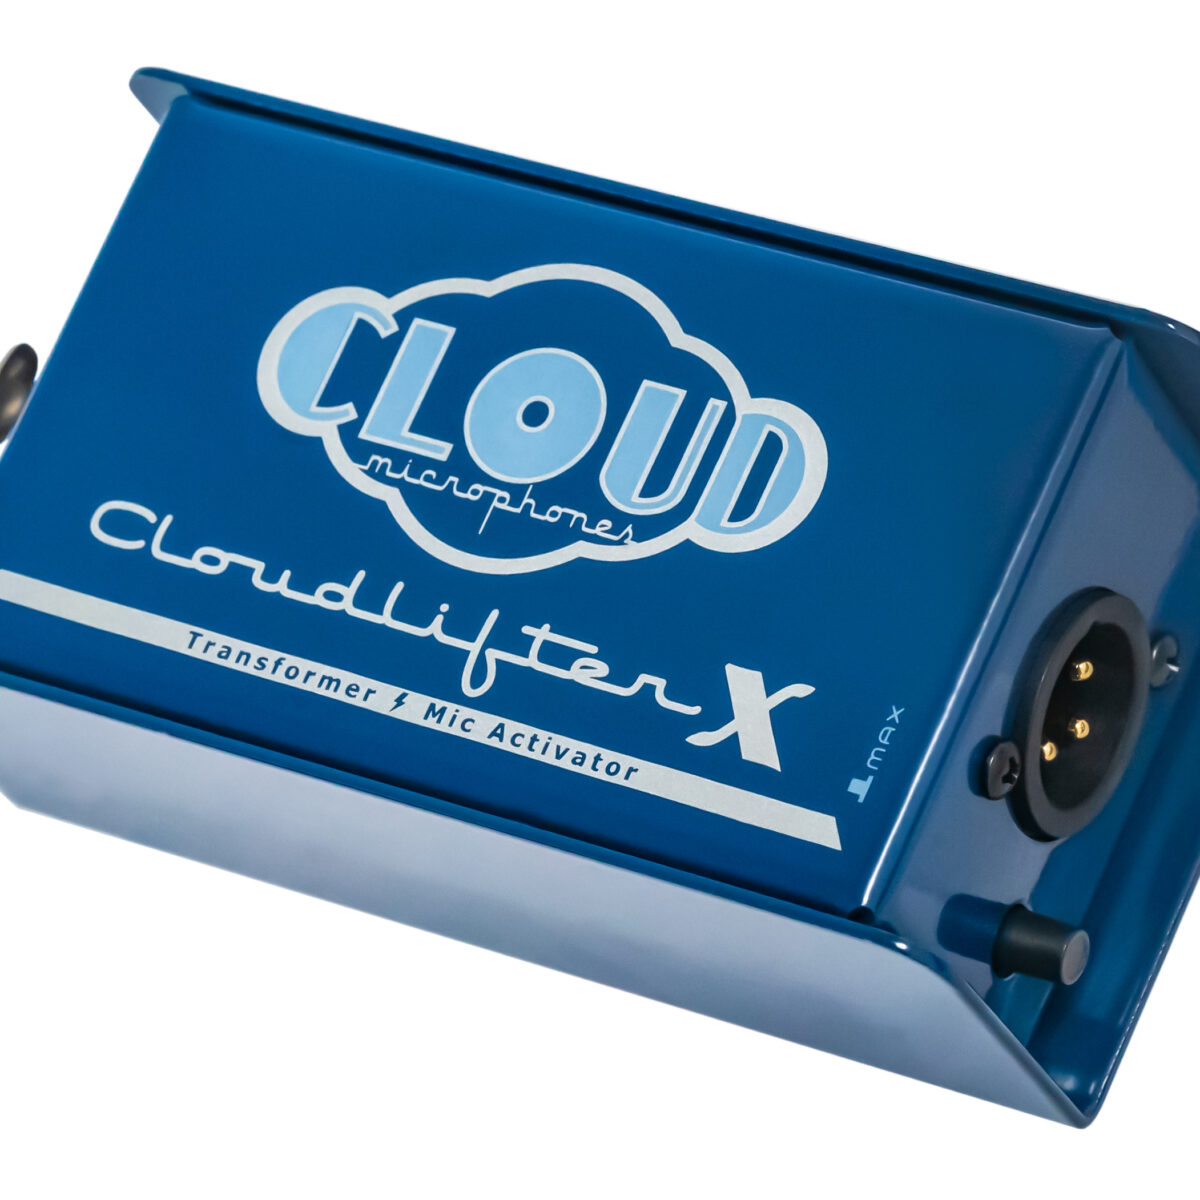 New Toys: Cloud Microphones Cloudlifter CL-X Mic Activator – Music